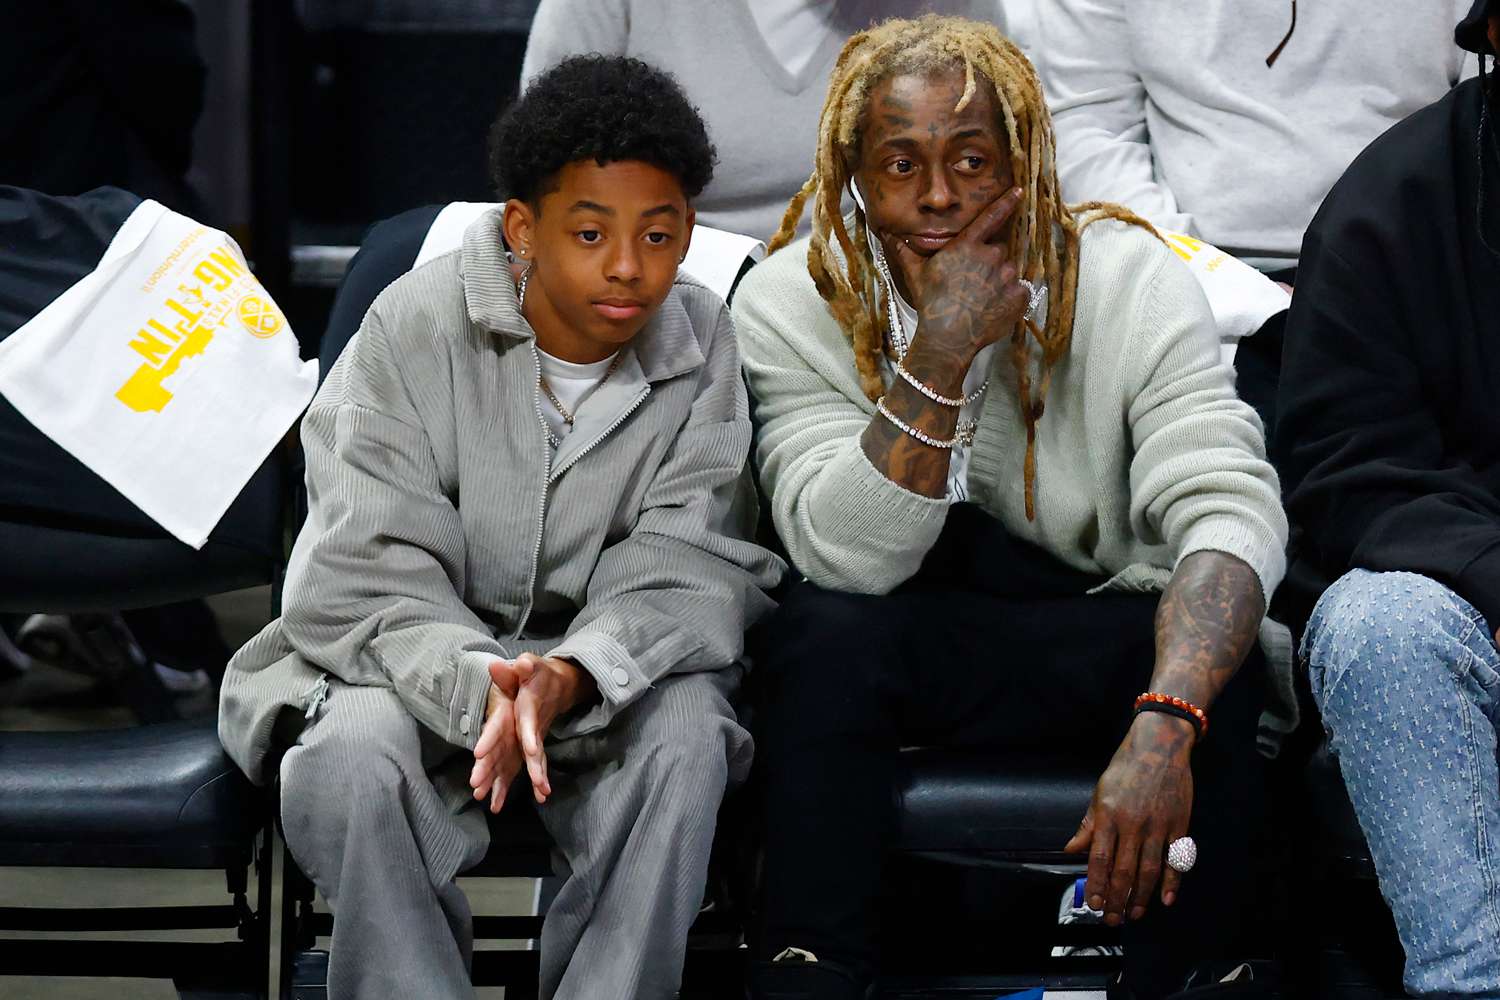 Lil Wayne Sits Courtside with Lookalike Son Kameron, 13, at NBA Finals